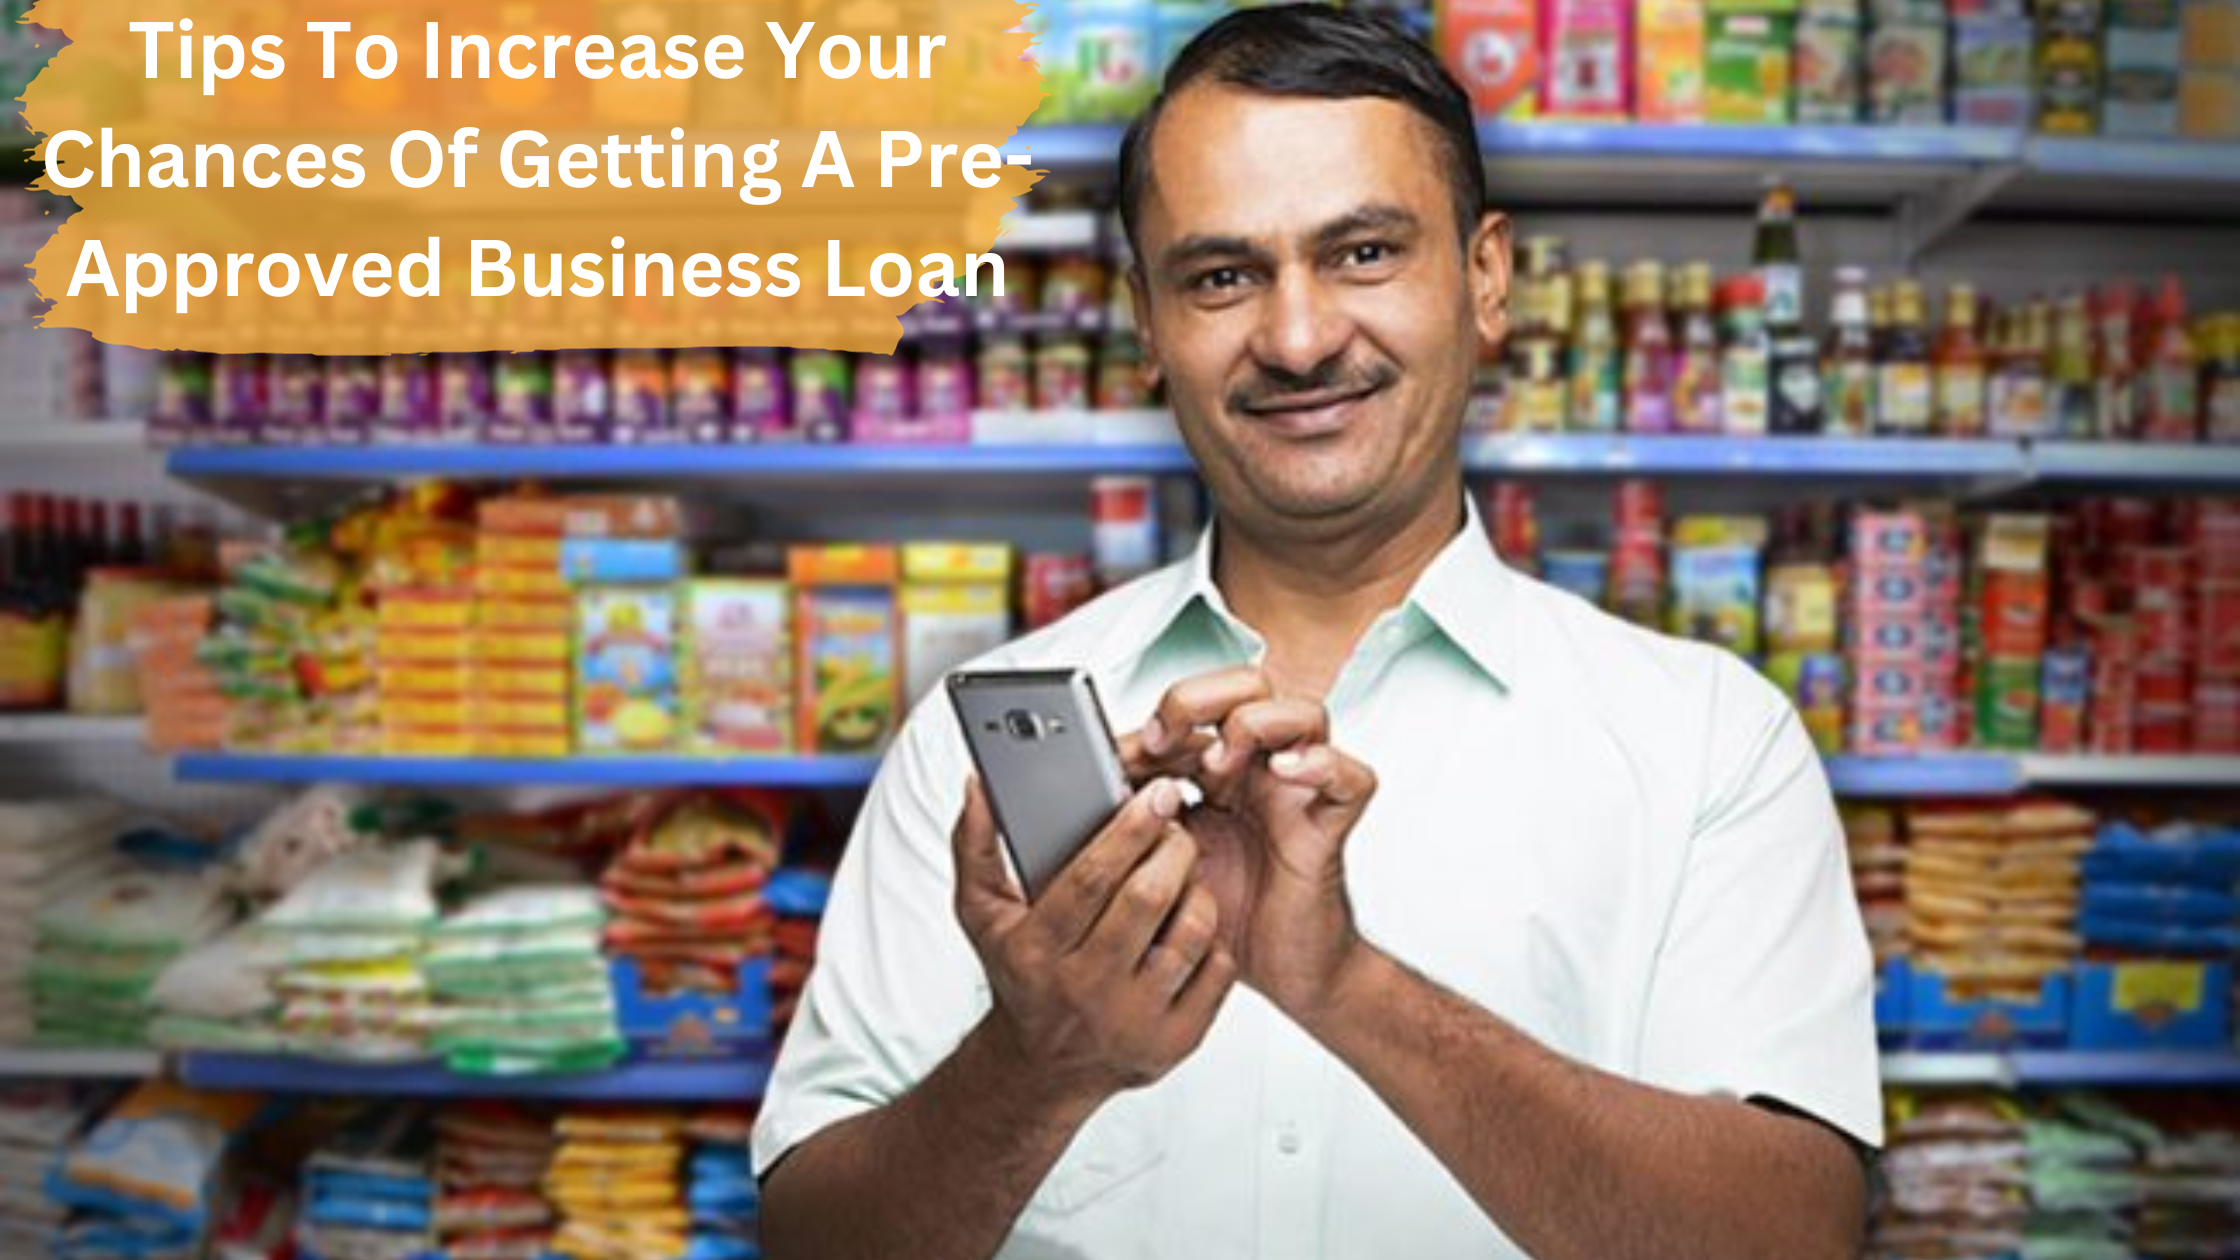 Tips To Increase Your Chances Of Getting A Pre-Approved Business Loan